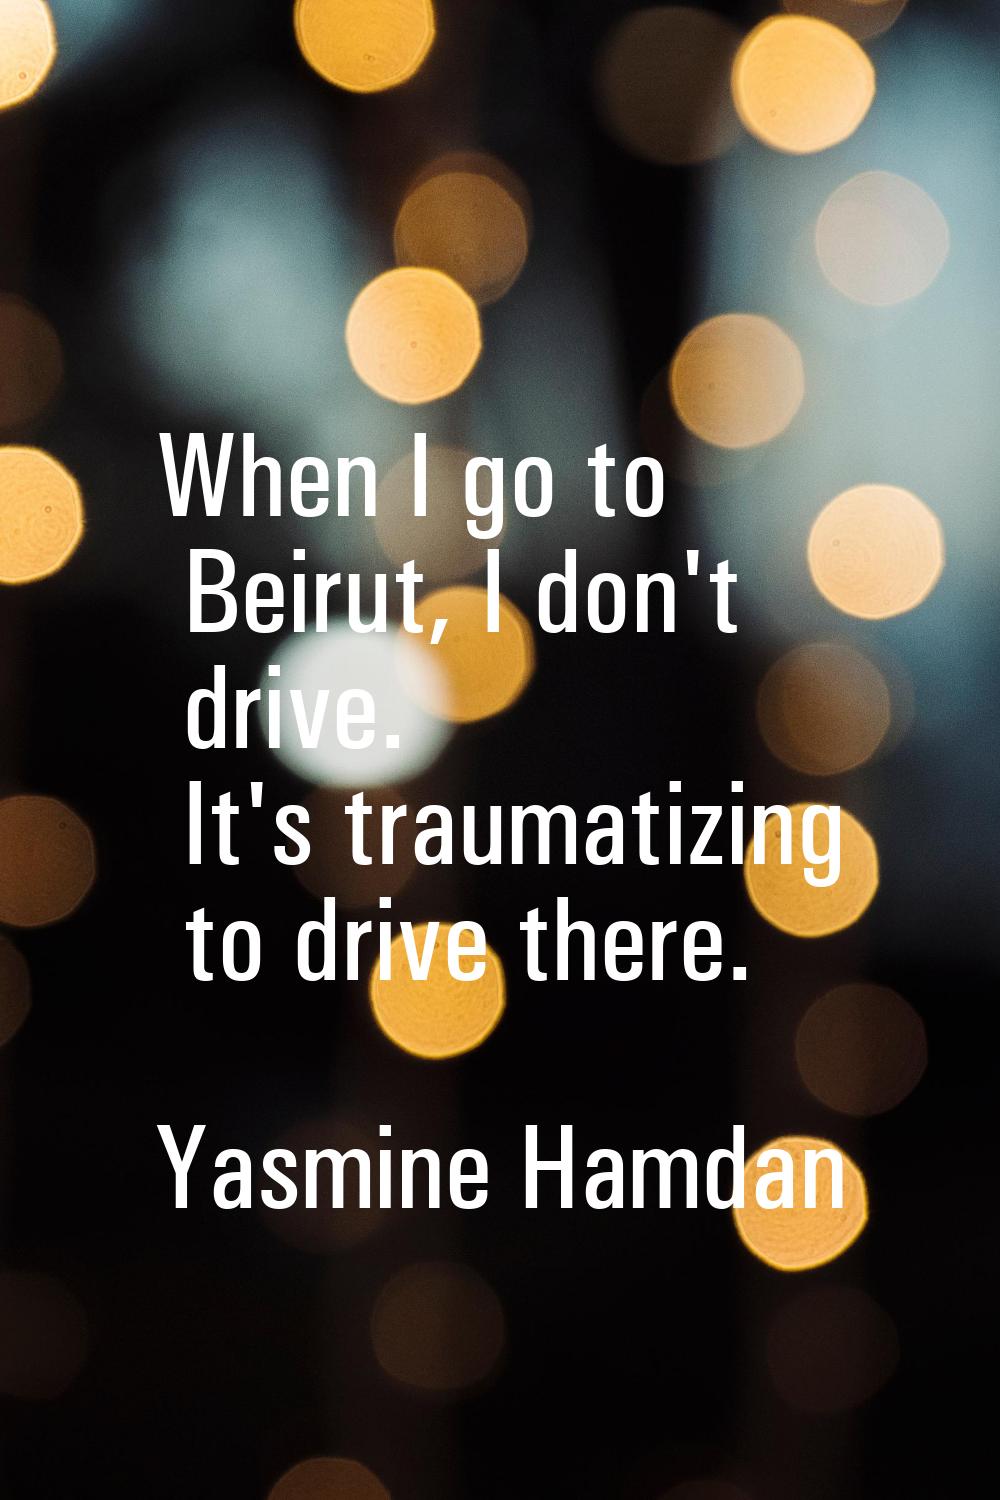 When I go to Beirut, I don't drive. It's traumatizing to drive there.